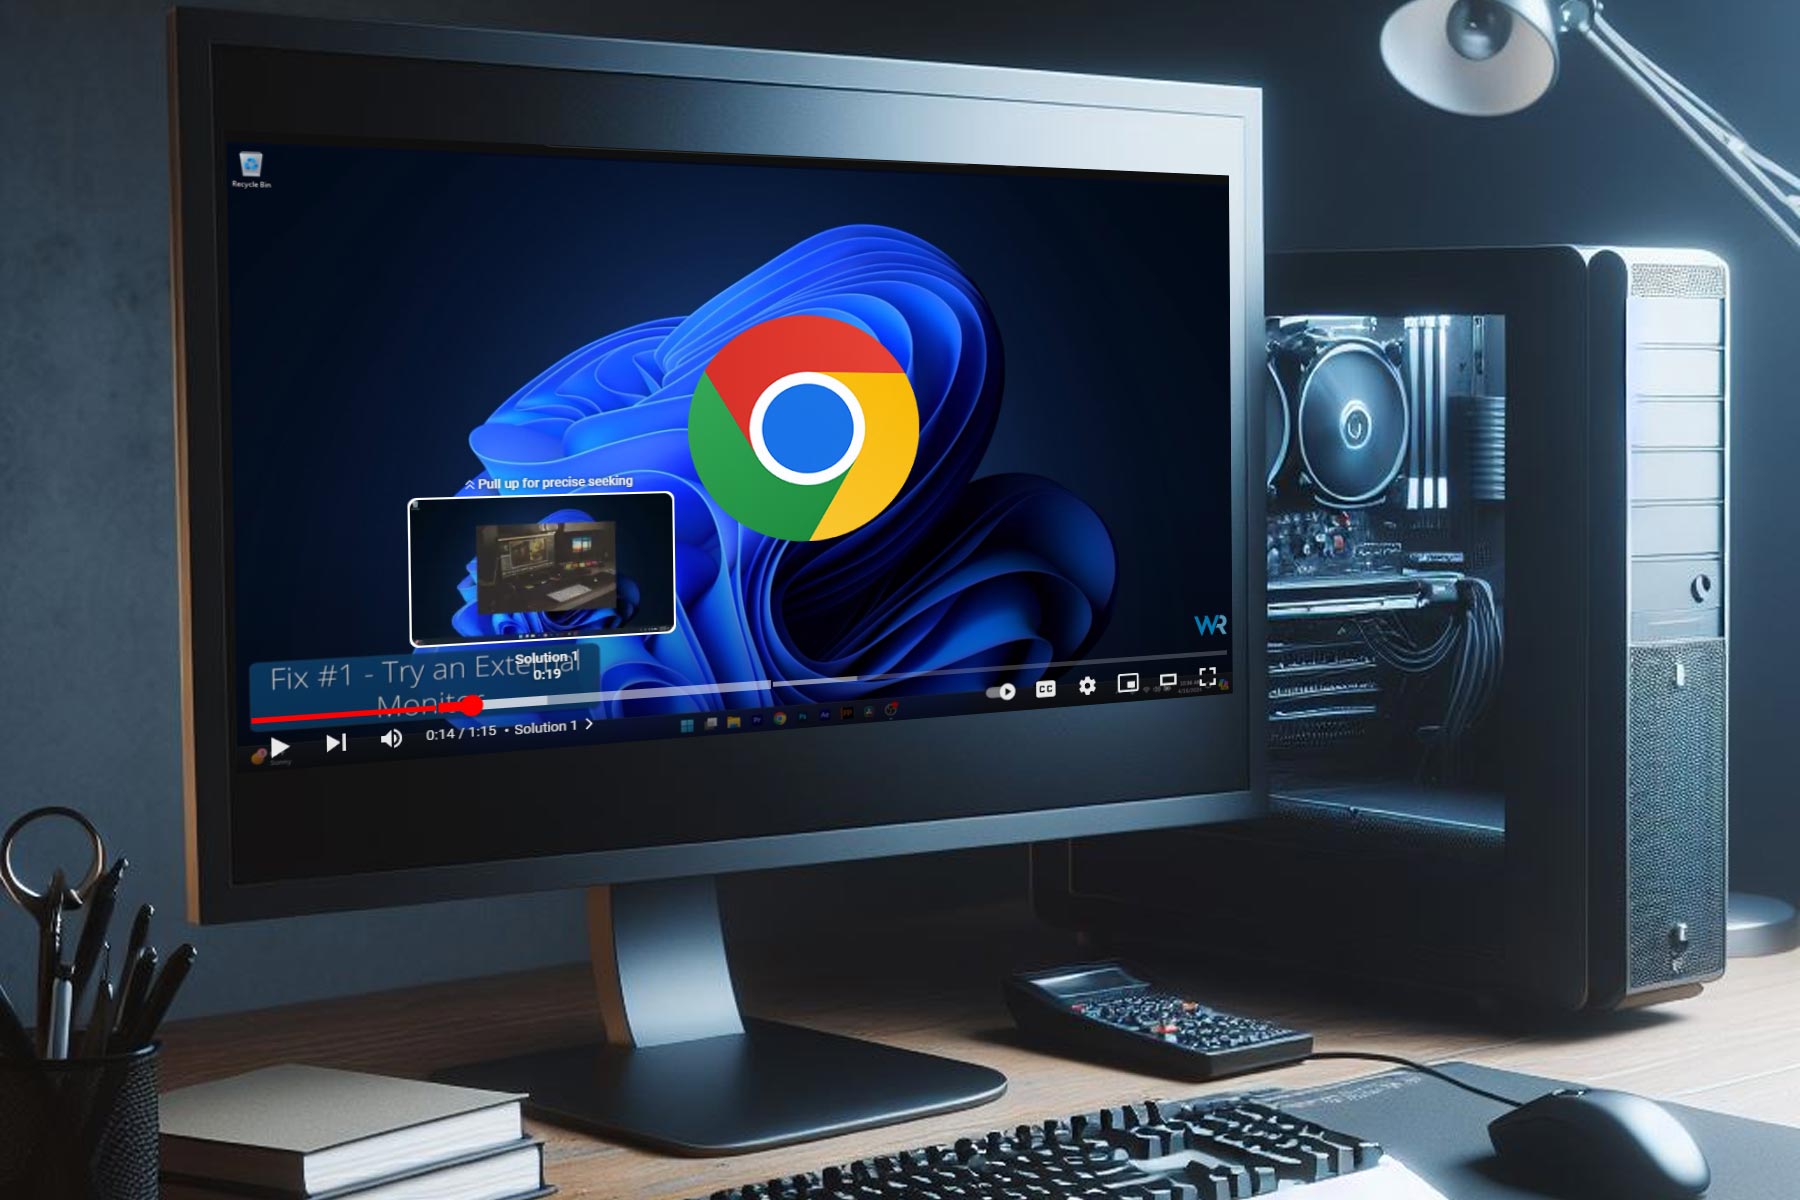 Chrome will get native support for chapters in all embedded videos